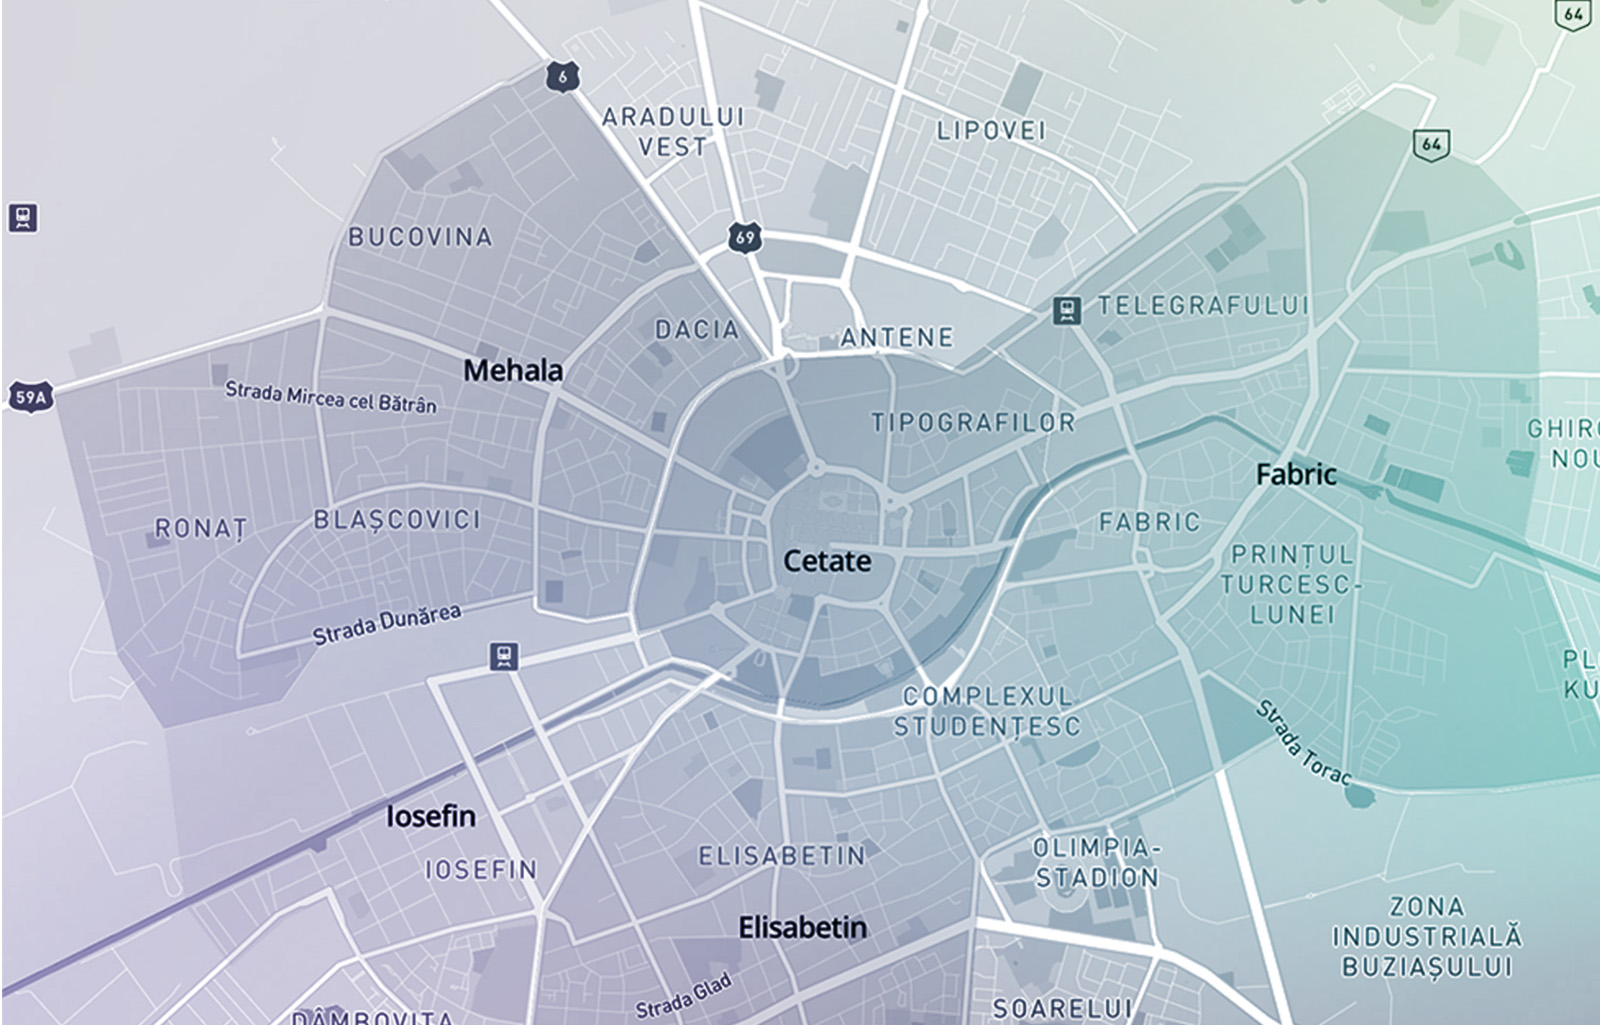 MAPPING THE PRODUCT COMMUNITY THAT MAKES THE CITY TICK